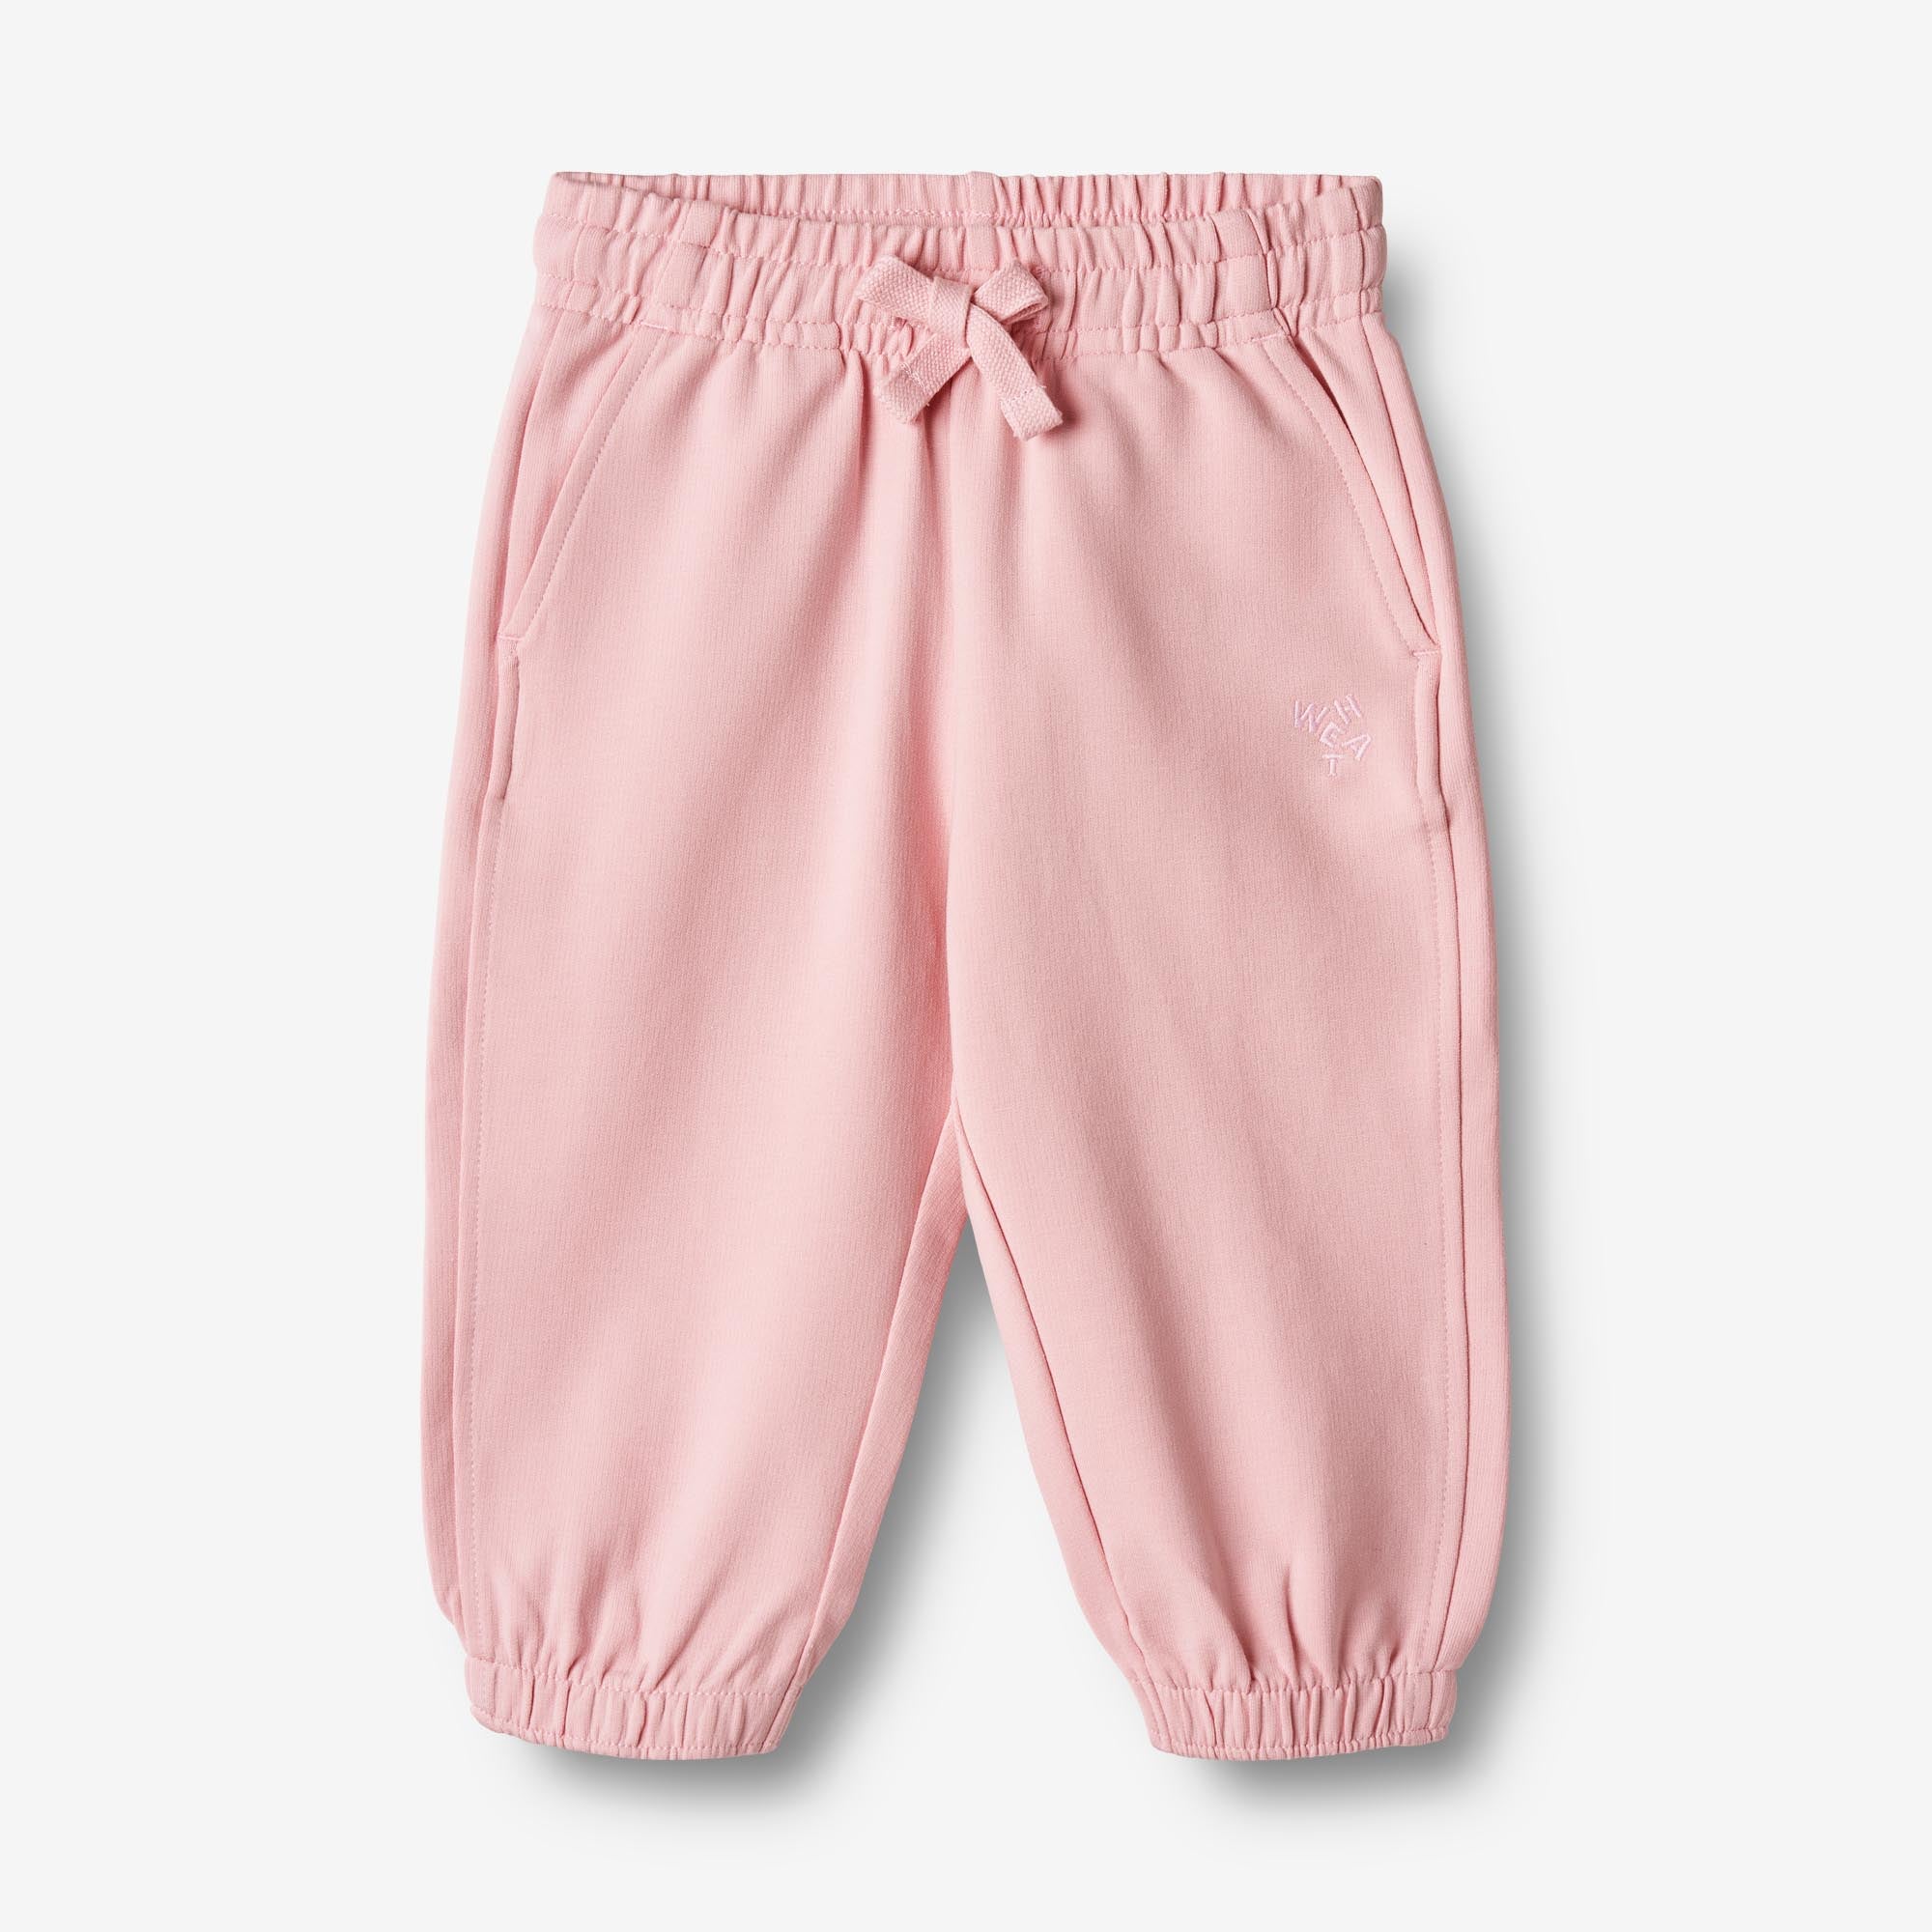 Sweatpants - See All Sweatpants for Children & Babies - Wheat